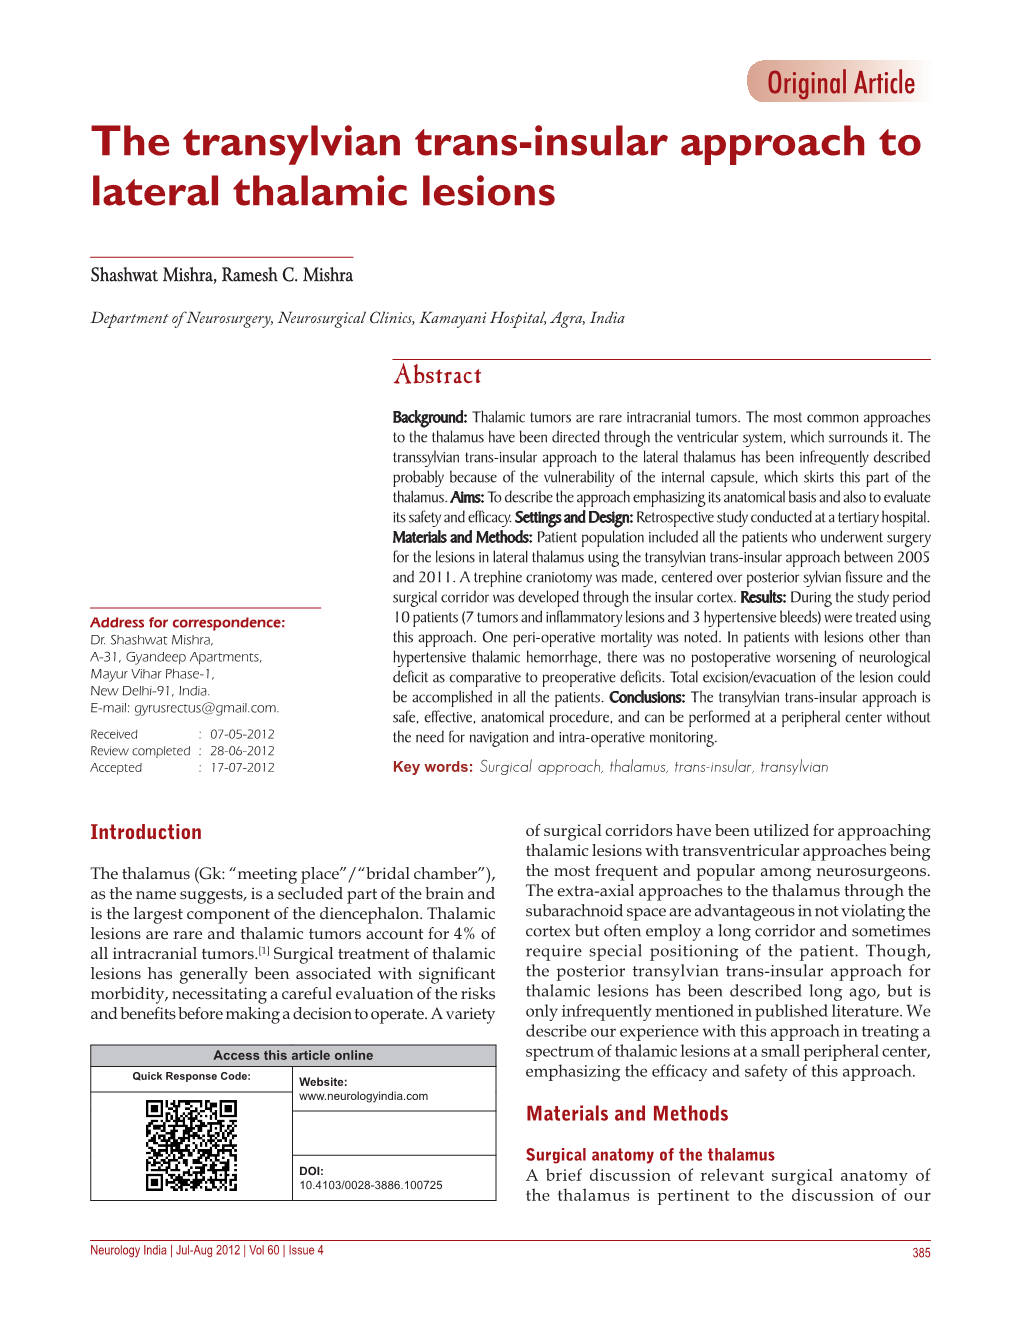 The Transylvian Trans-Insular Approach to Lateral Thalamic Lesions